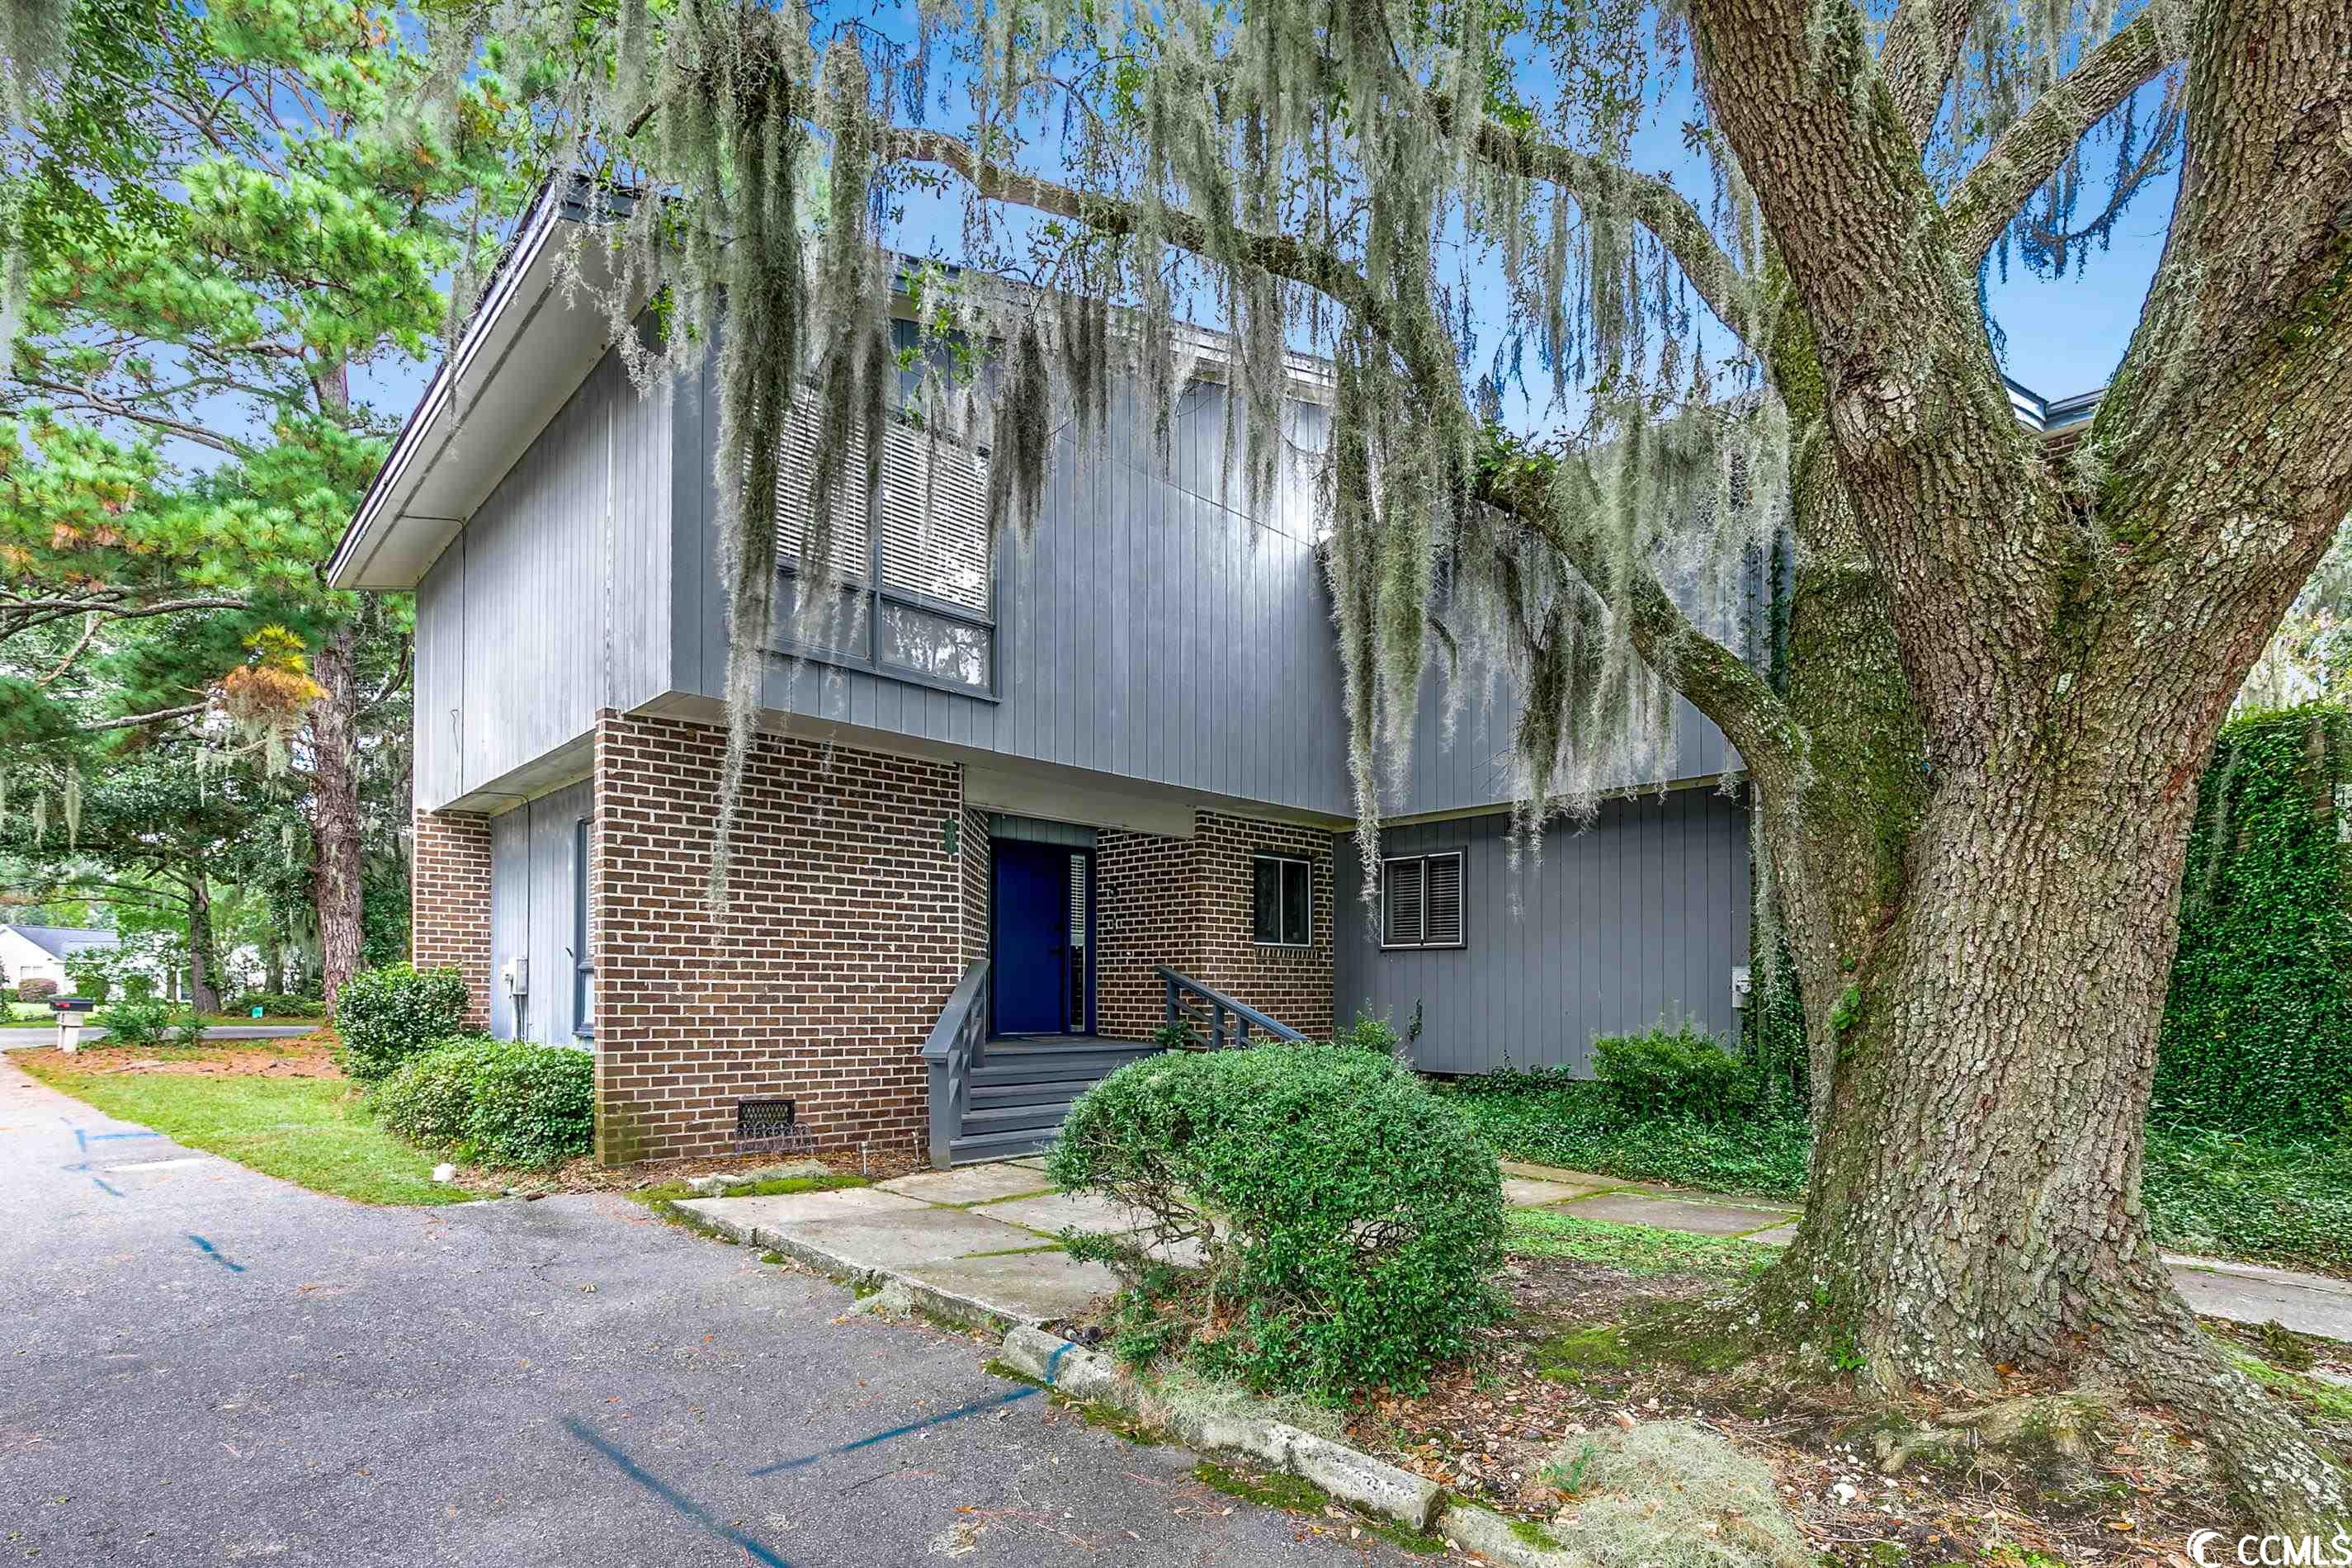 836 Wraggs Ferry Rd. UNIT #101 Georgetown, SC 29440